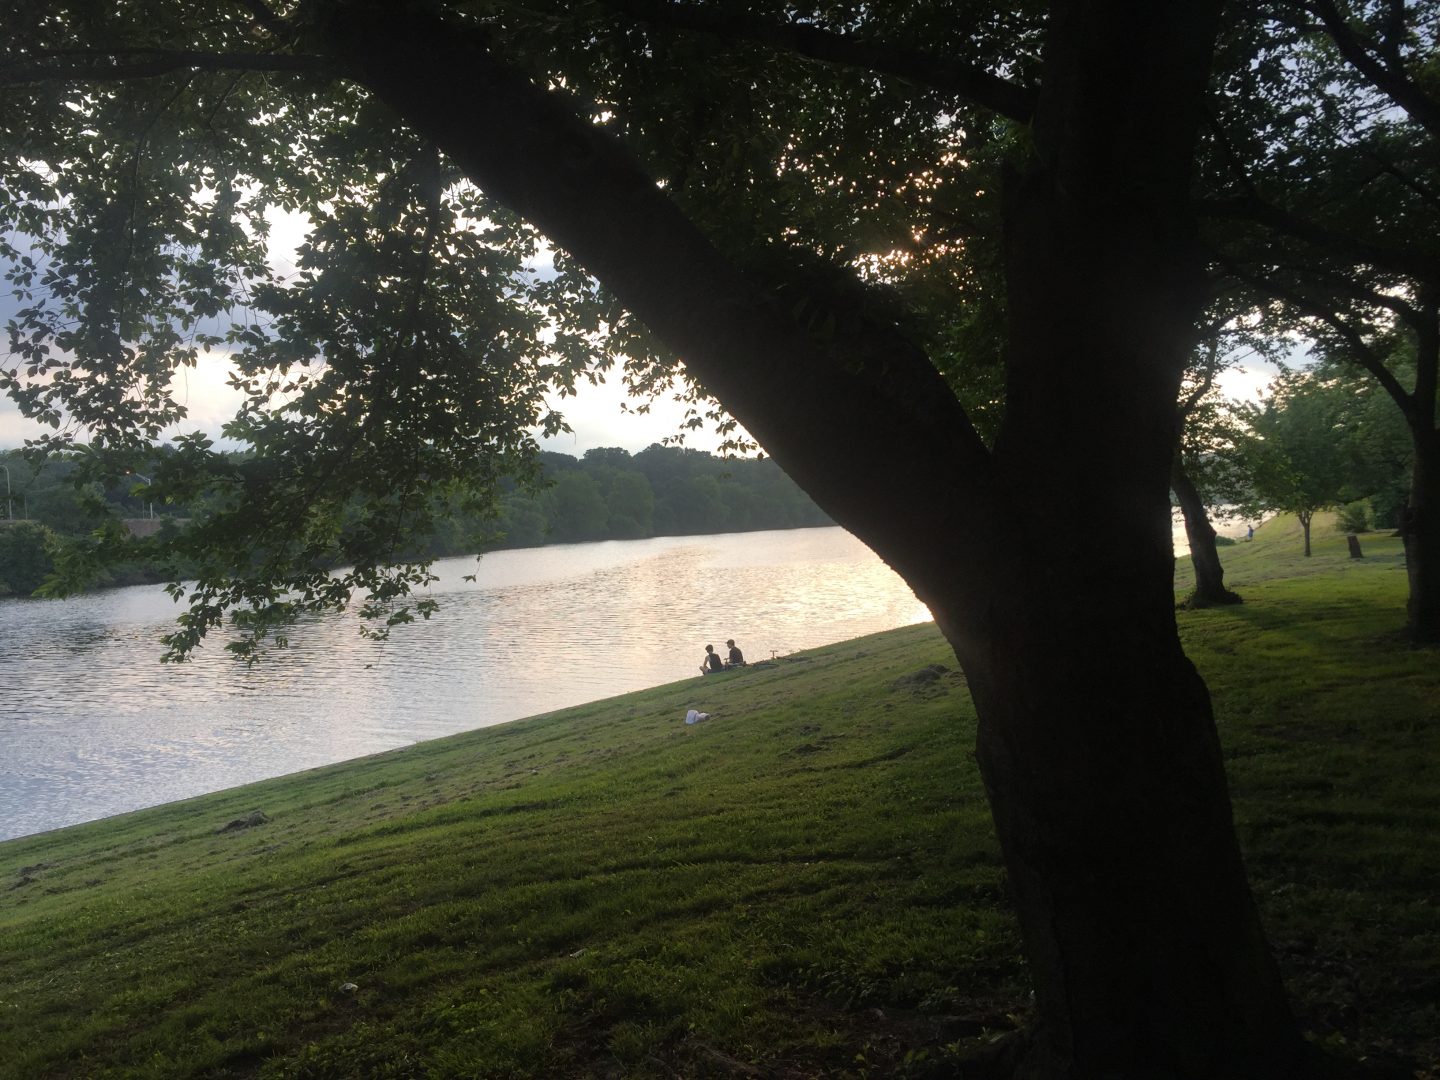 The Schuylkill river at dusk in Philadelphia. The river is a popular fishing spot. In 2018, the New Jersey DEP began testing fish for the family of chemicals known as PFAS and issued fish advisories. New Jersey has stricter limits on PFAS exposure than Pennsylvania.